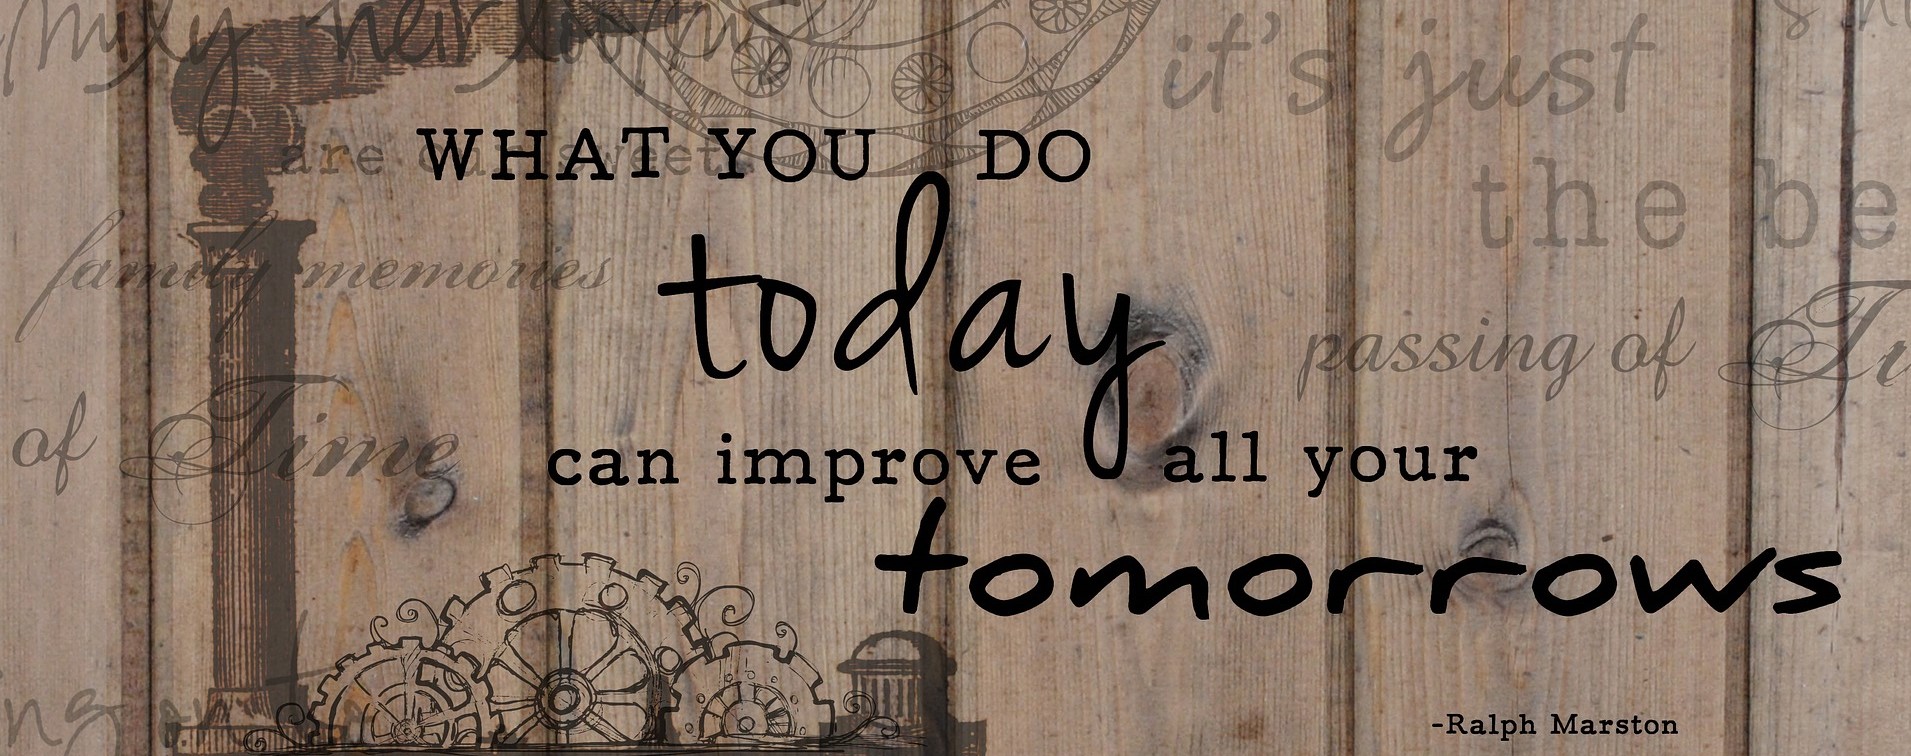 Motivational Quote "What you do today can improve all your tomorrows" by Raplh Marston on a wooden textured wall pic